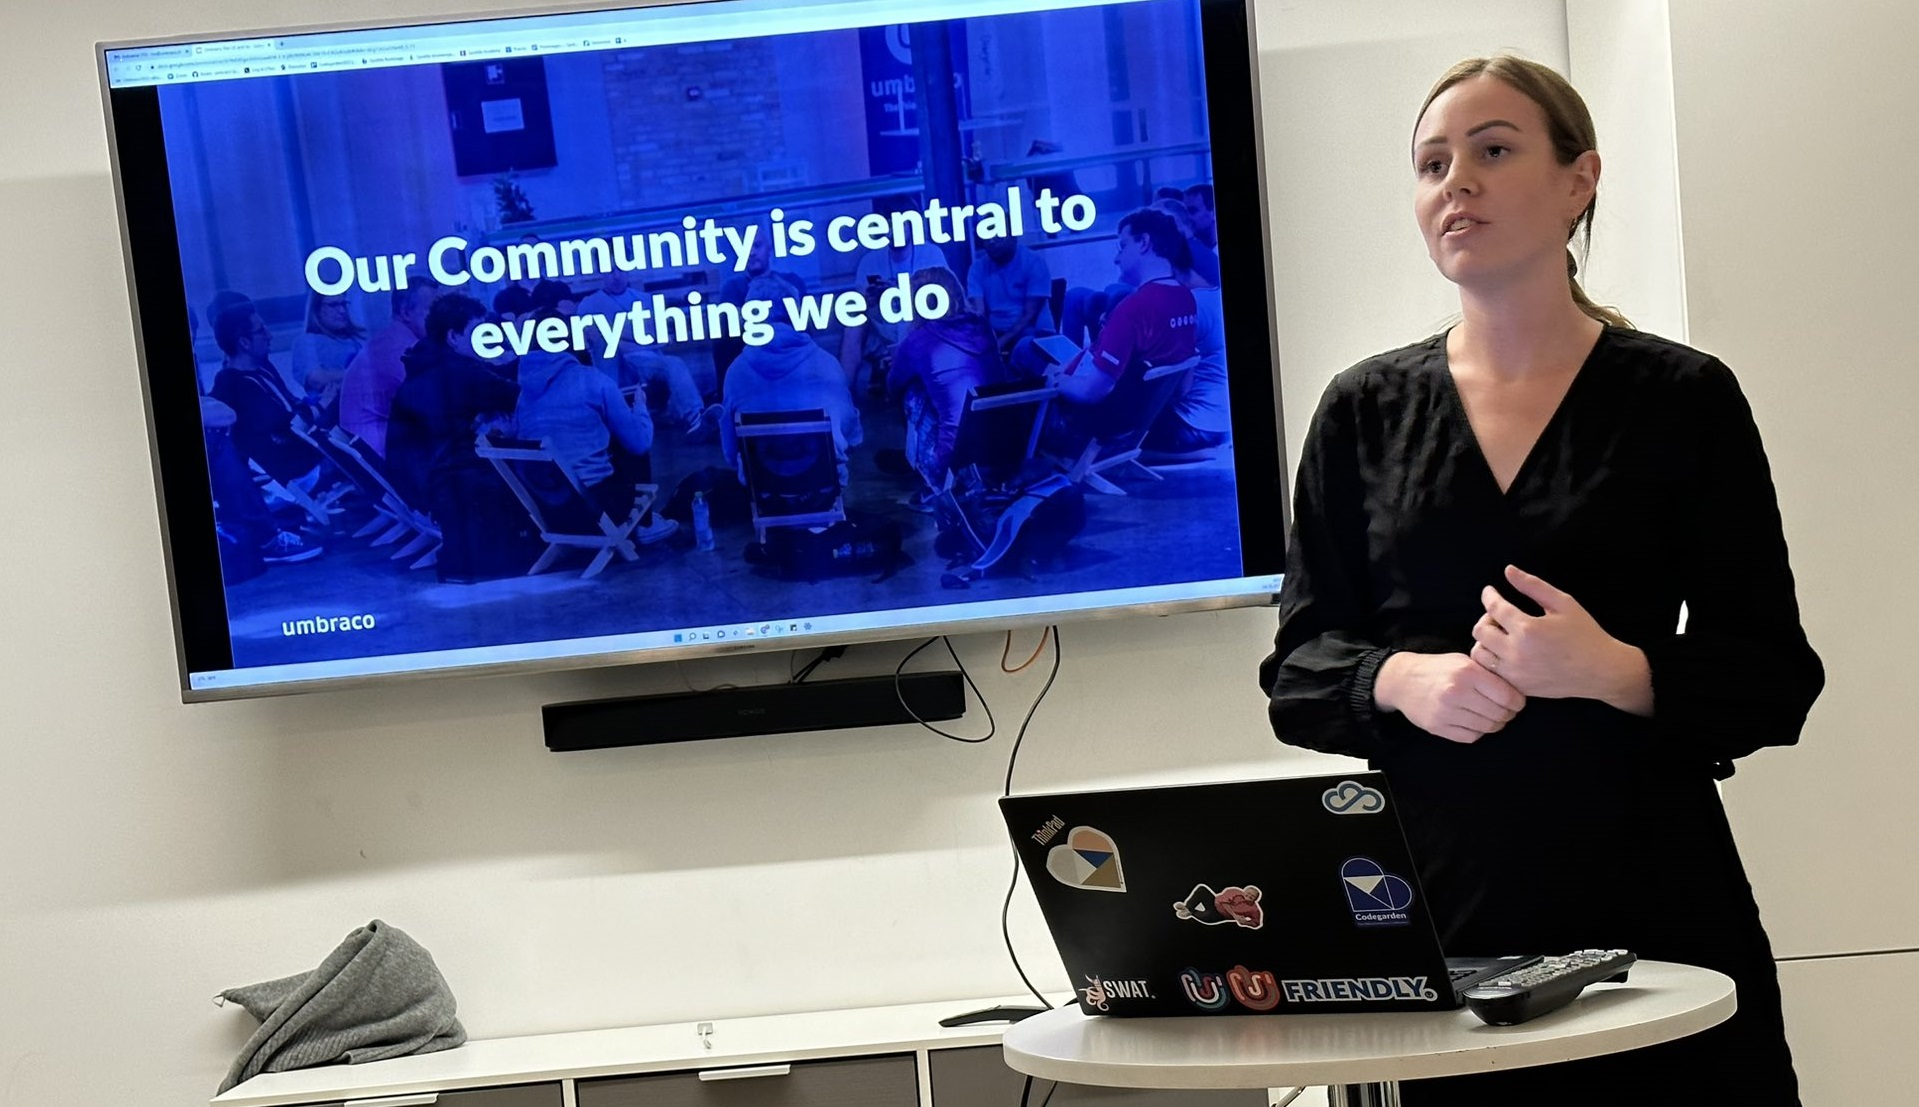 The Community is central to Umbraco